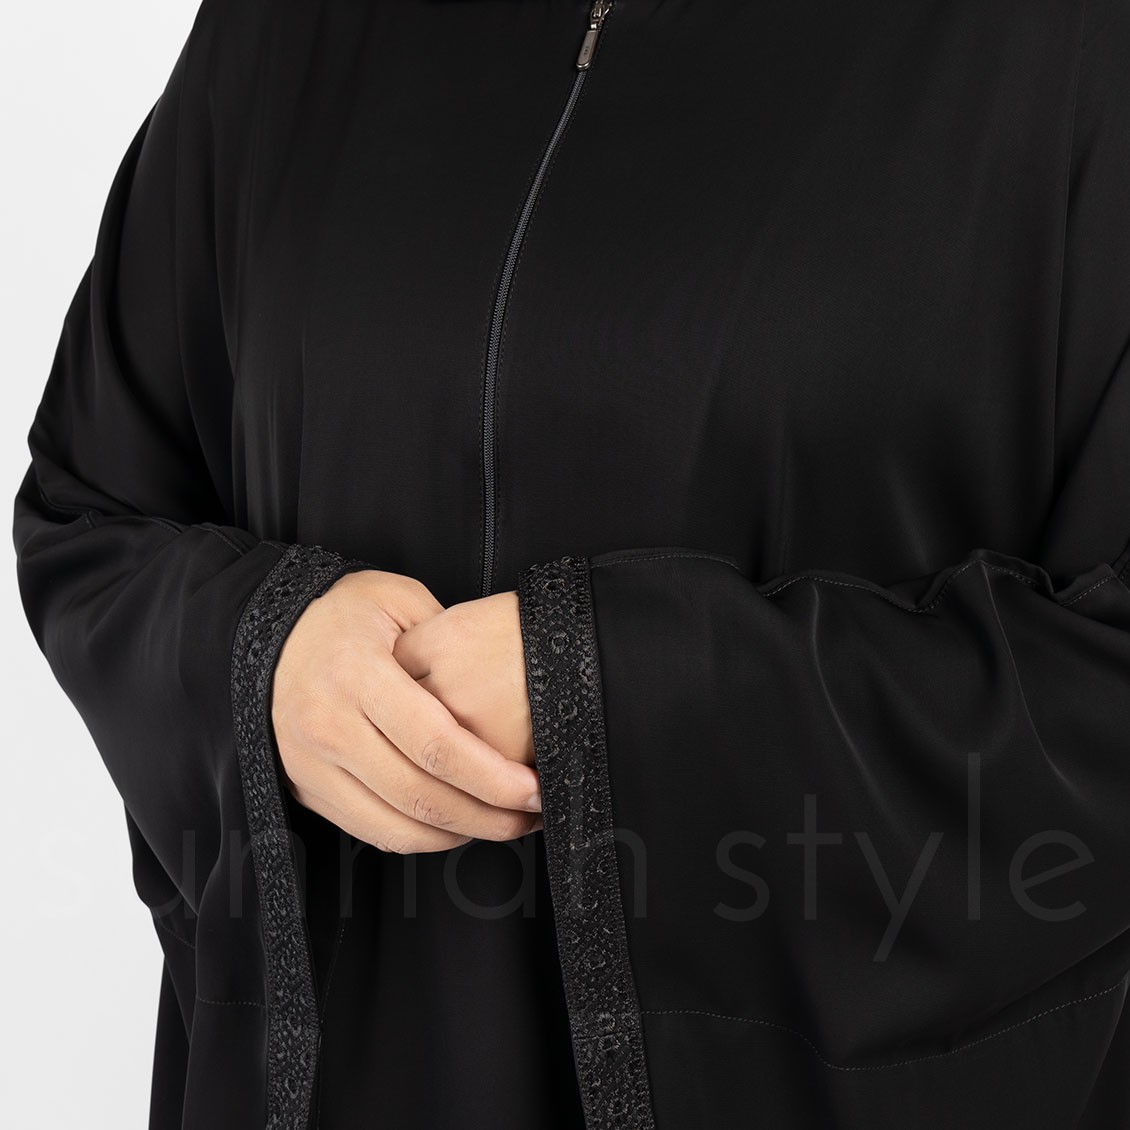 Sunnah Style Obsidian Butterfly Abaya Black Batwing Embroidery